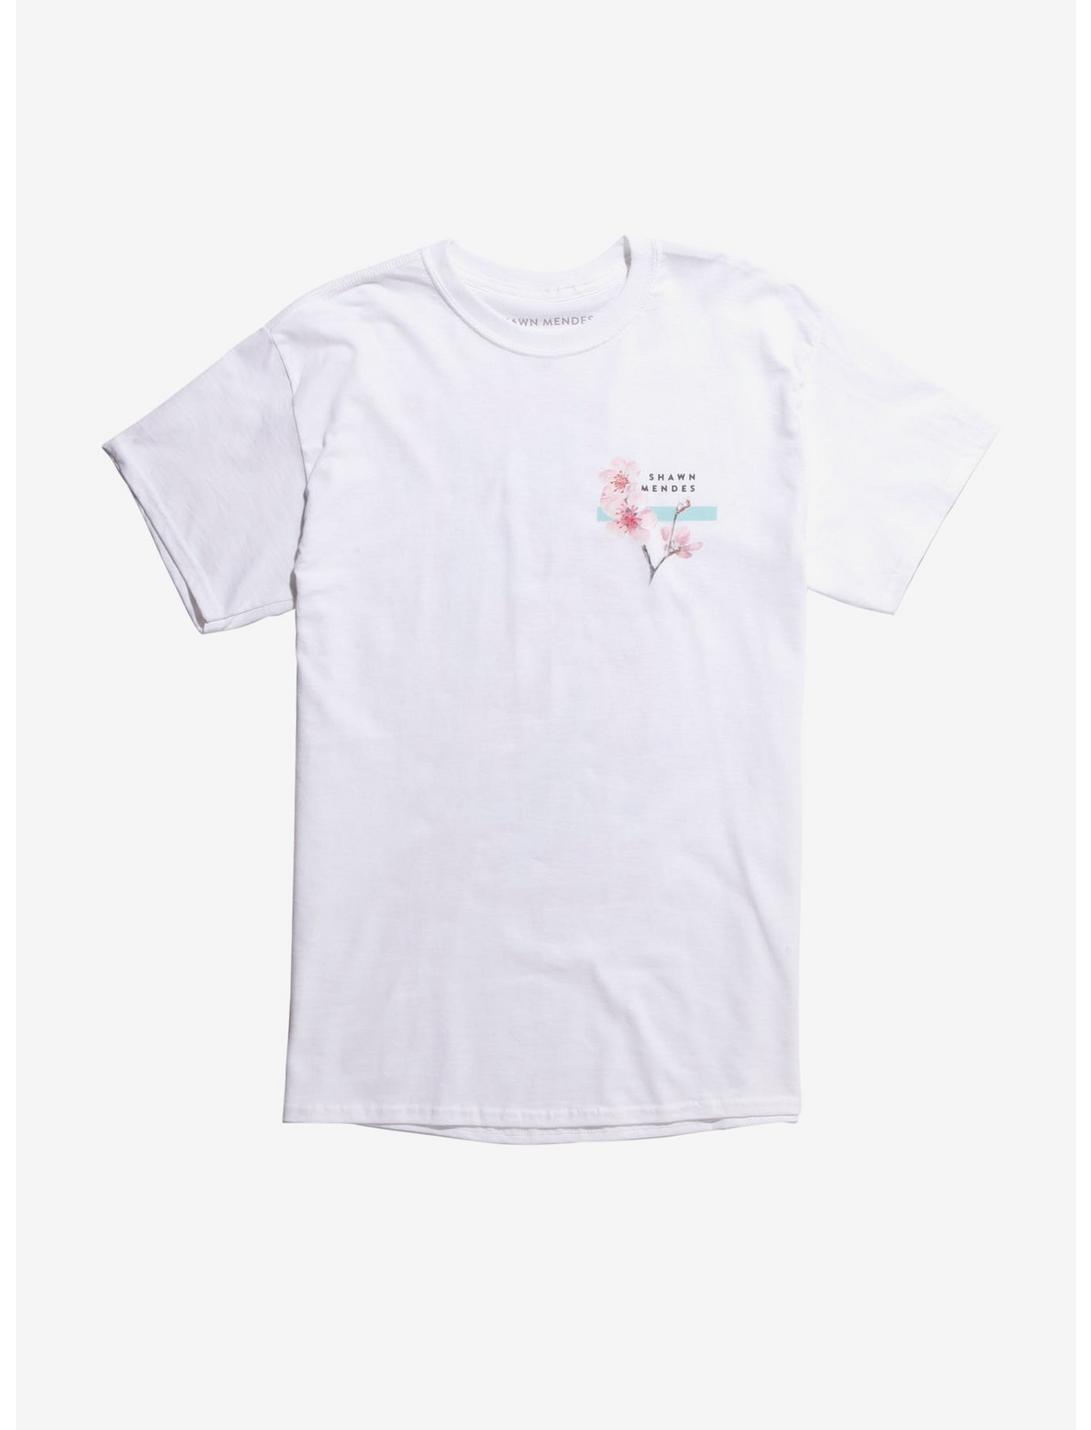 Shawn Mendes Cherry Blossom T-Shirt | Hot Topic